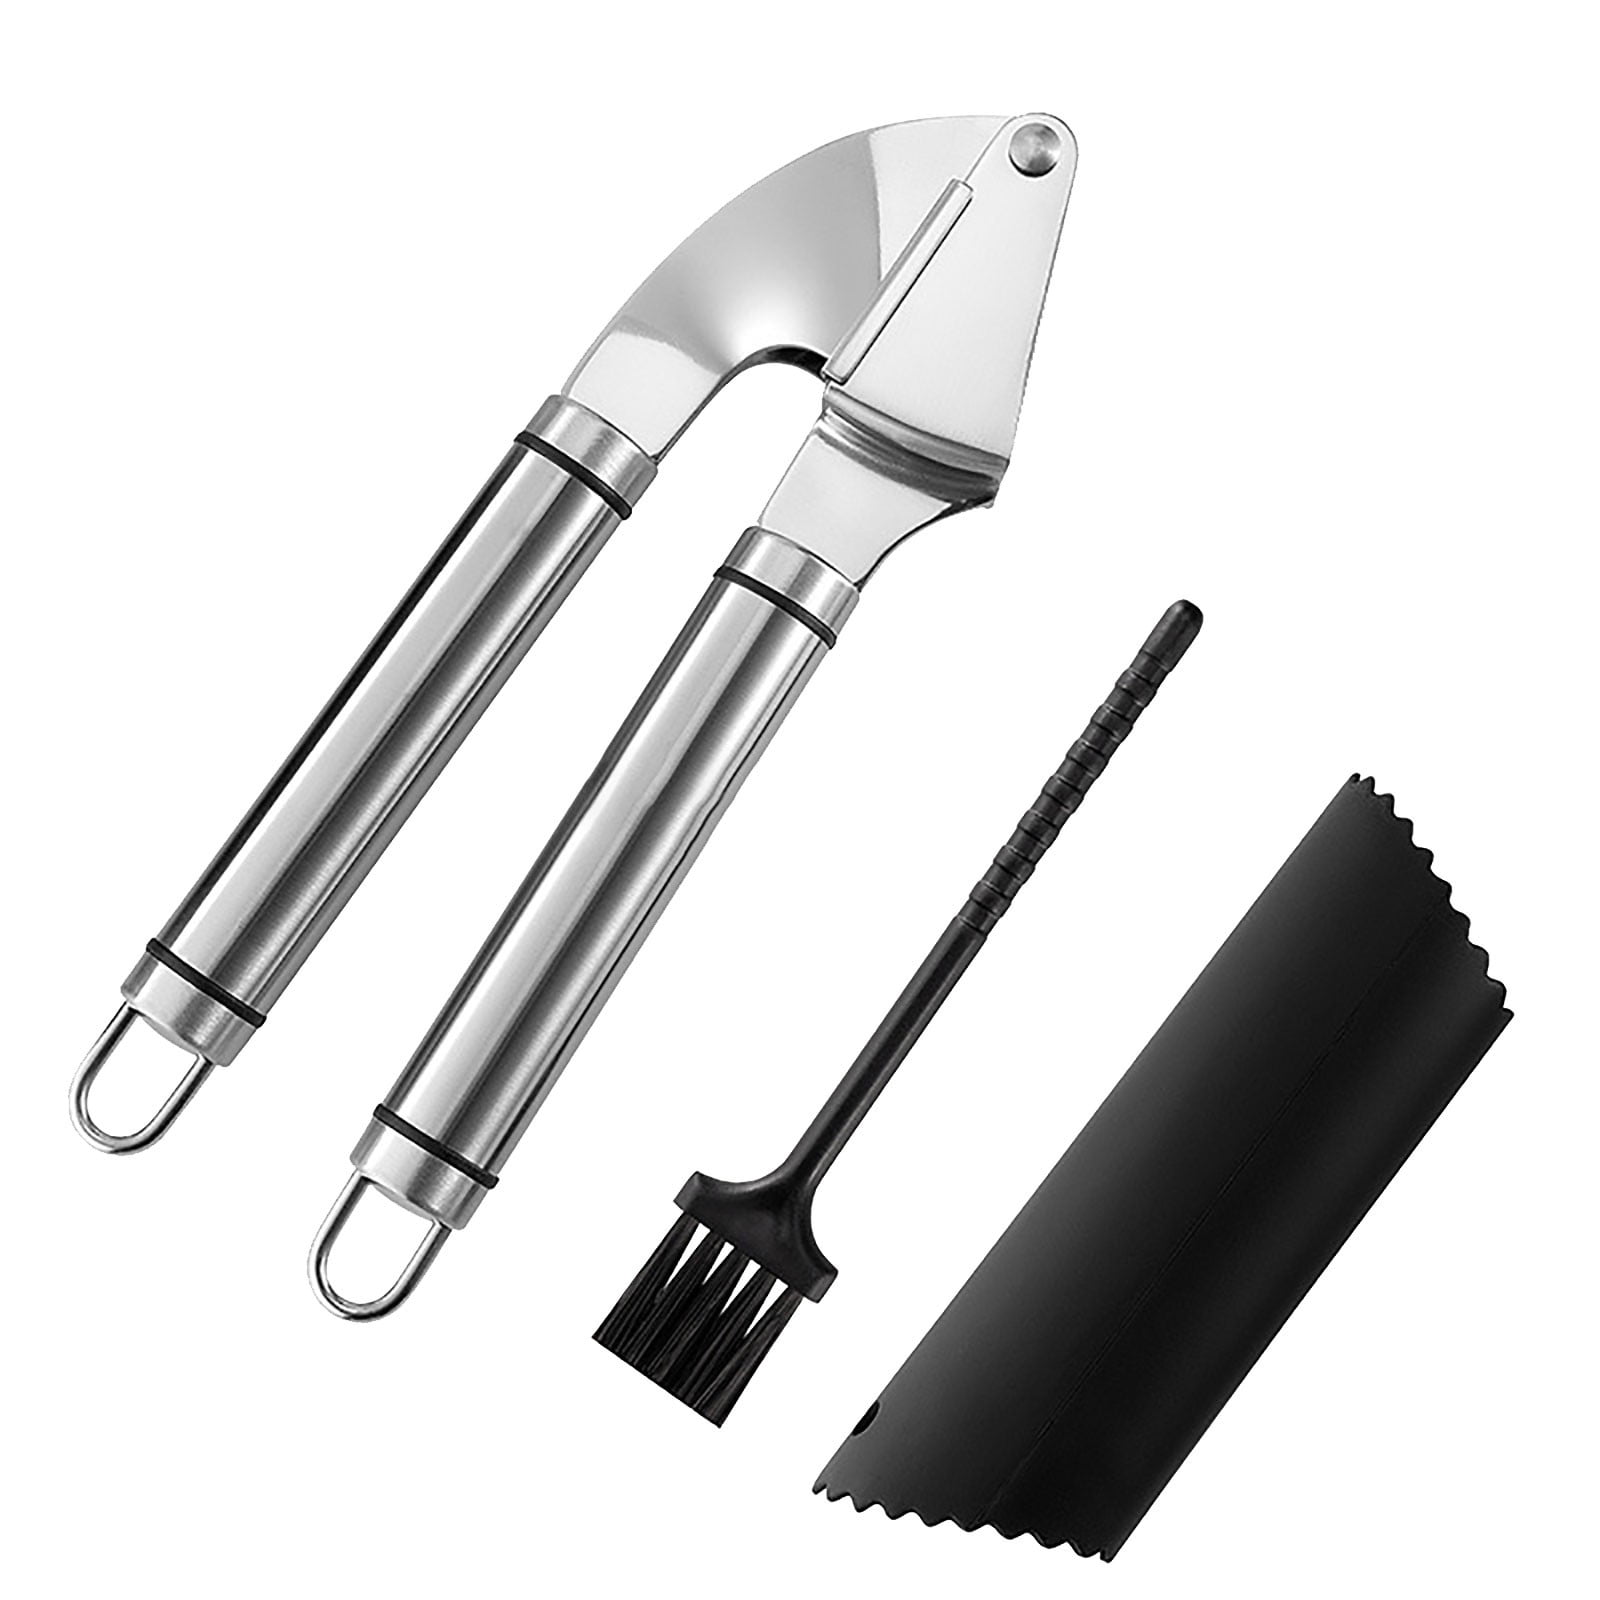 Professional Garlic Press Stainless Steel Mincer Crusher Silicone Roller Peelers 